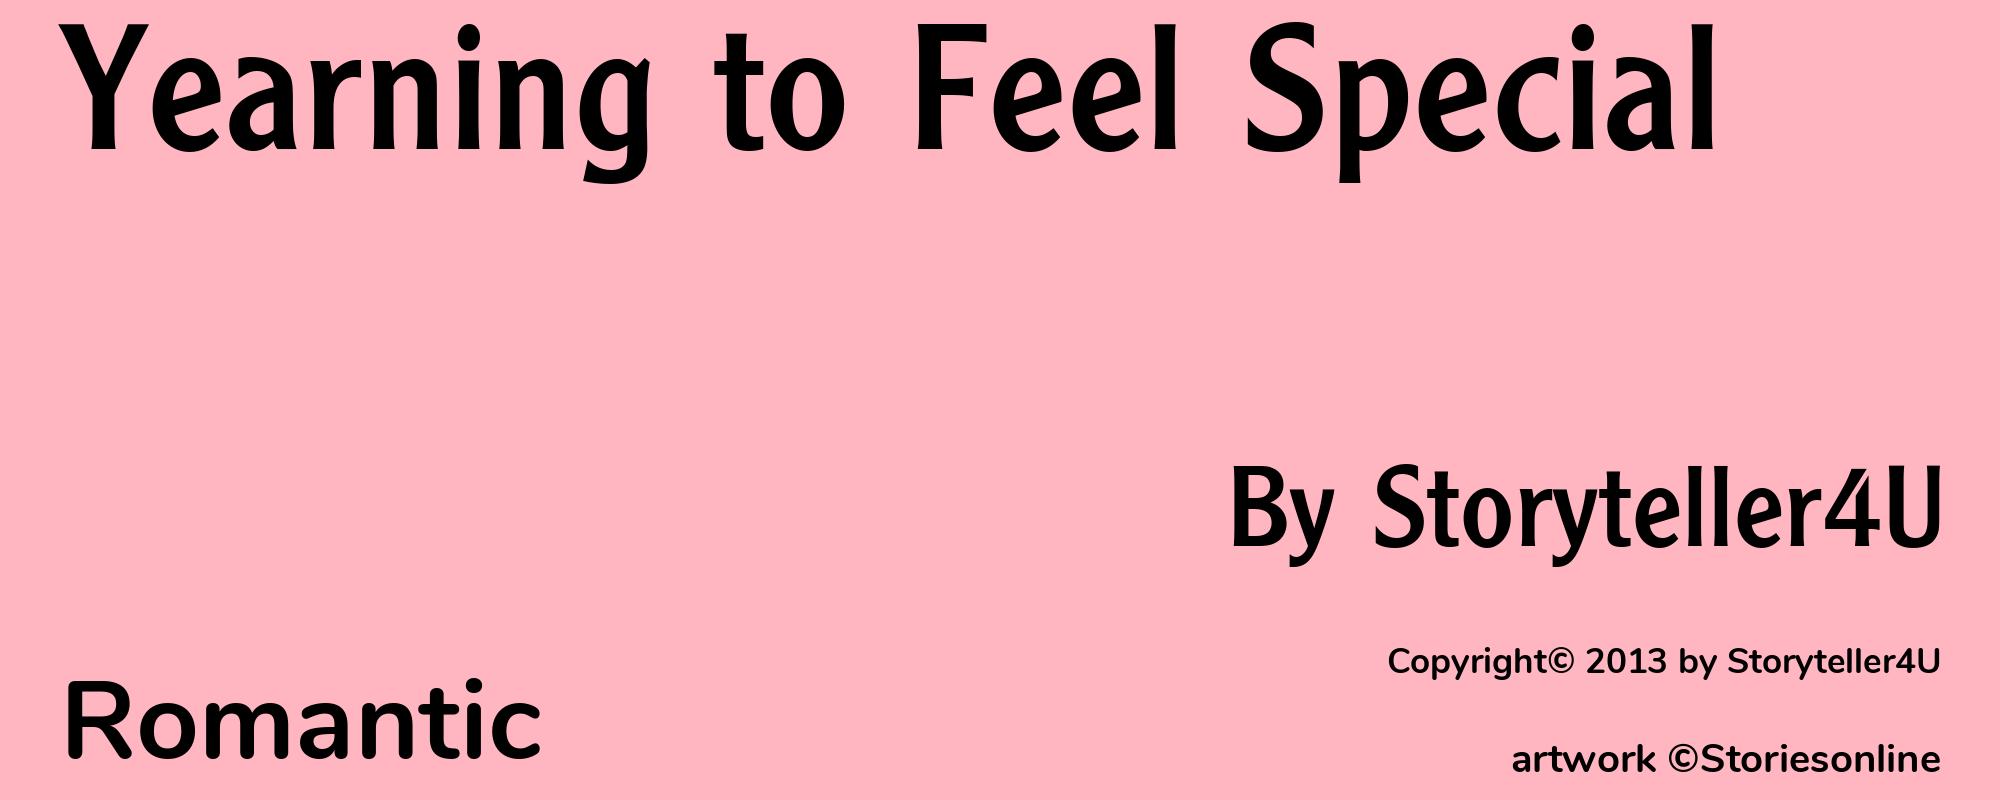 Yearning to Feel Special - Cover